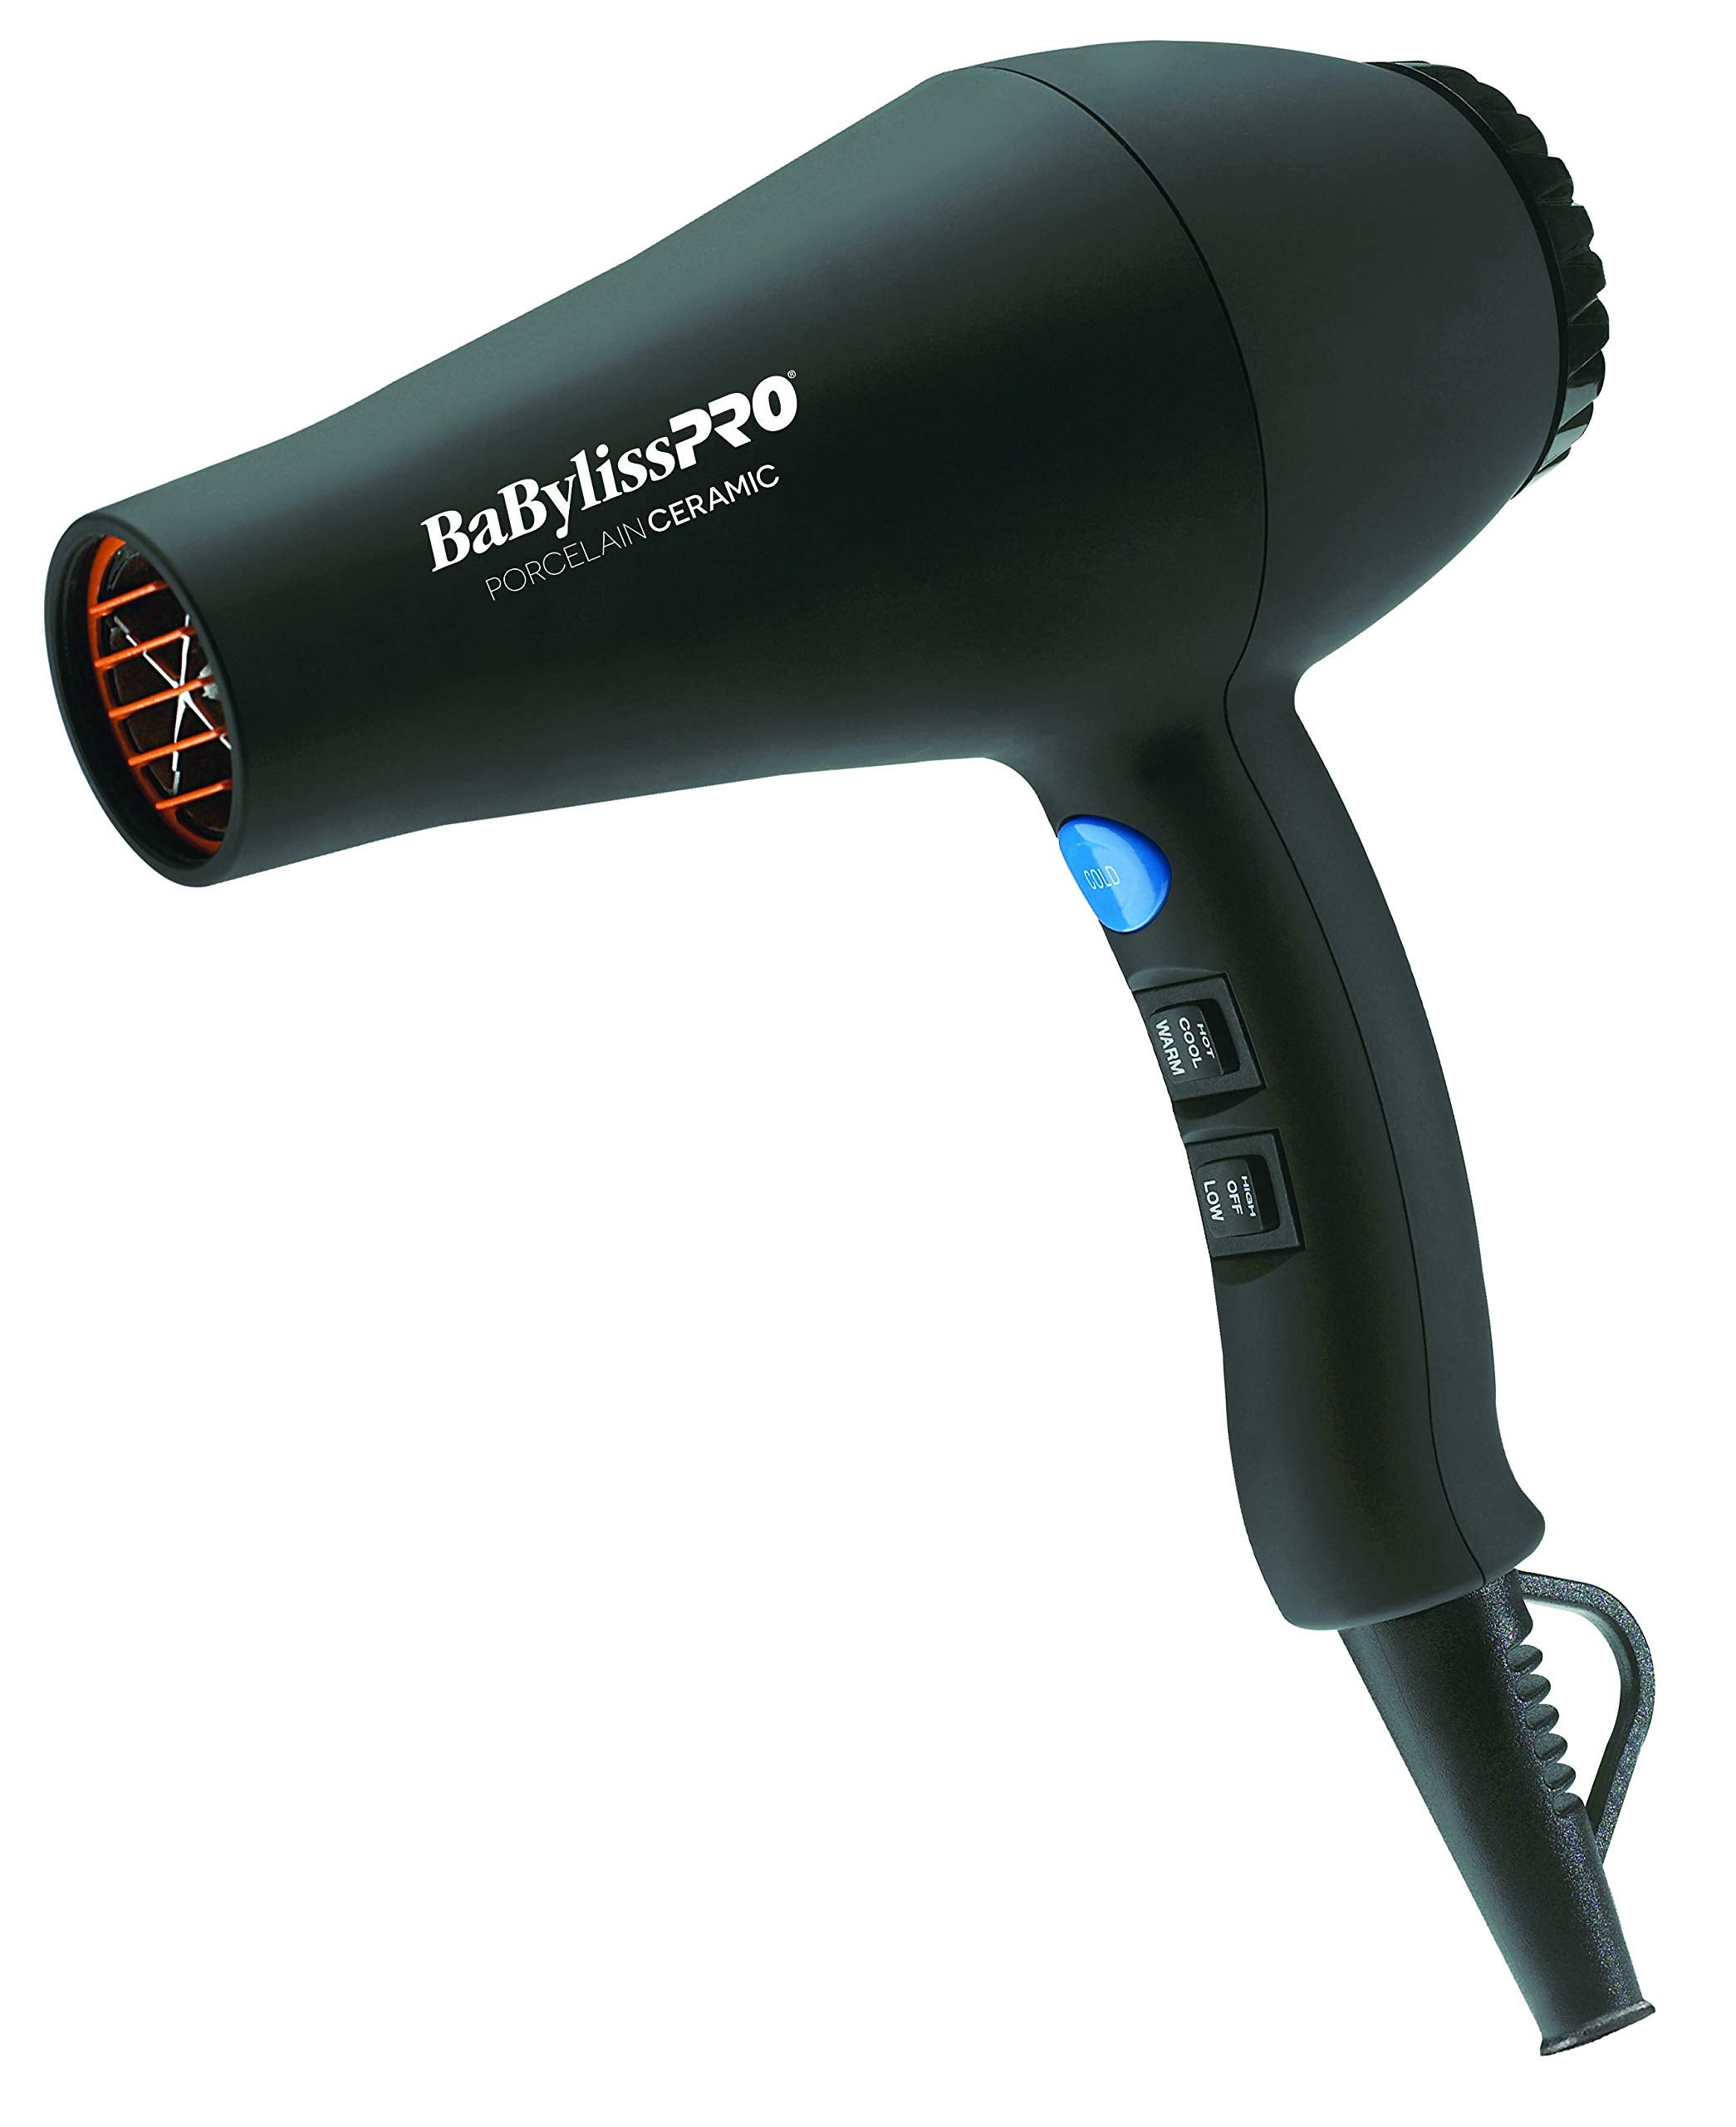 The Best Affordable Hair Dryers For Home Styling 2021